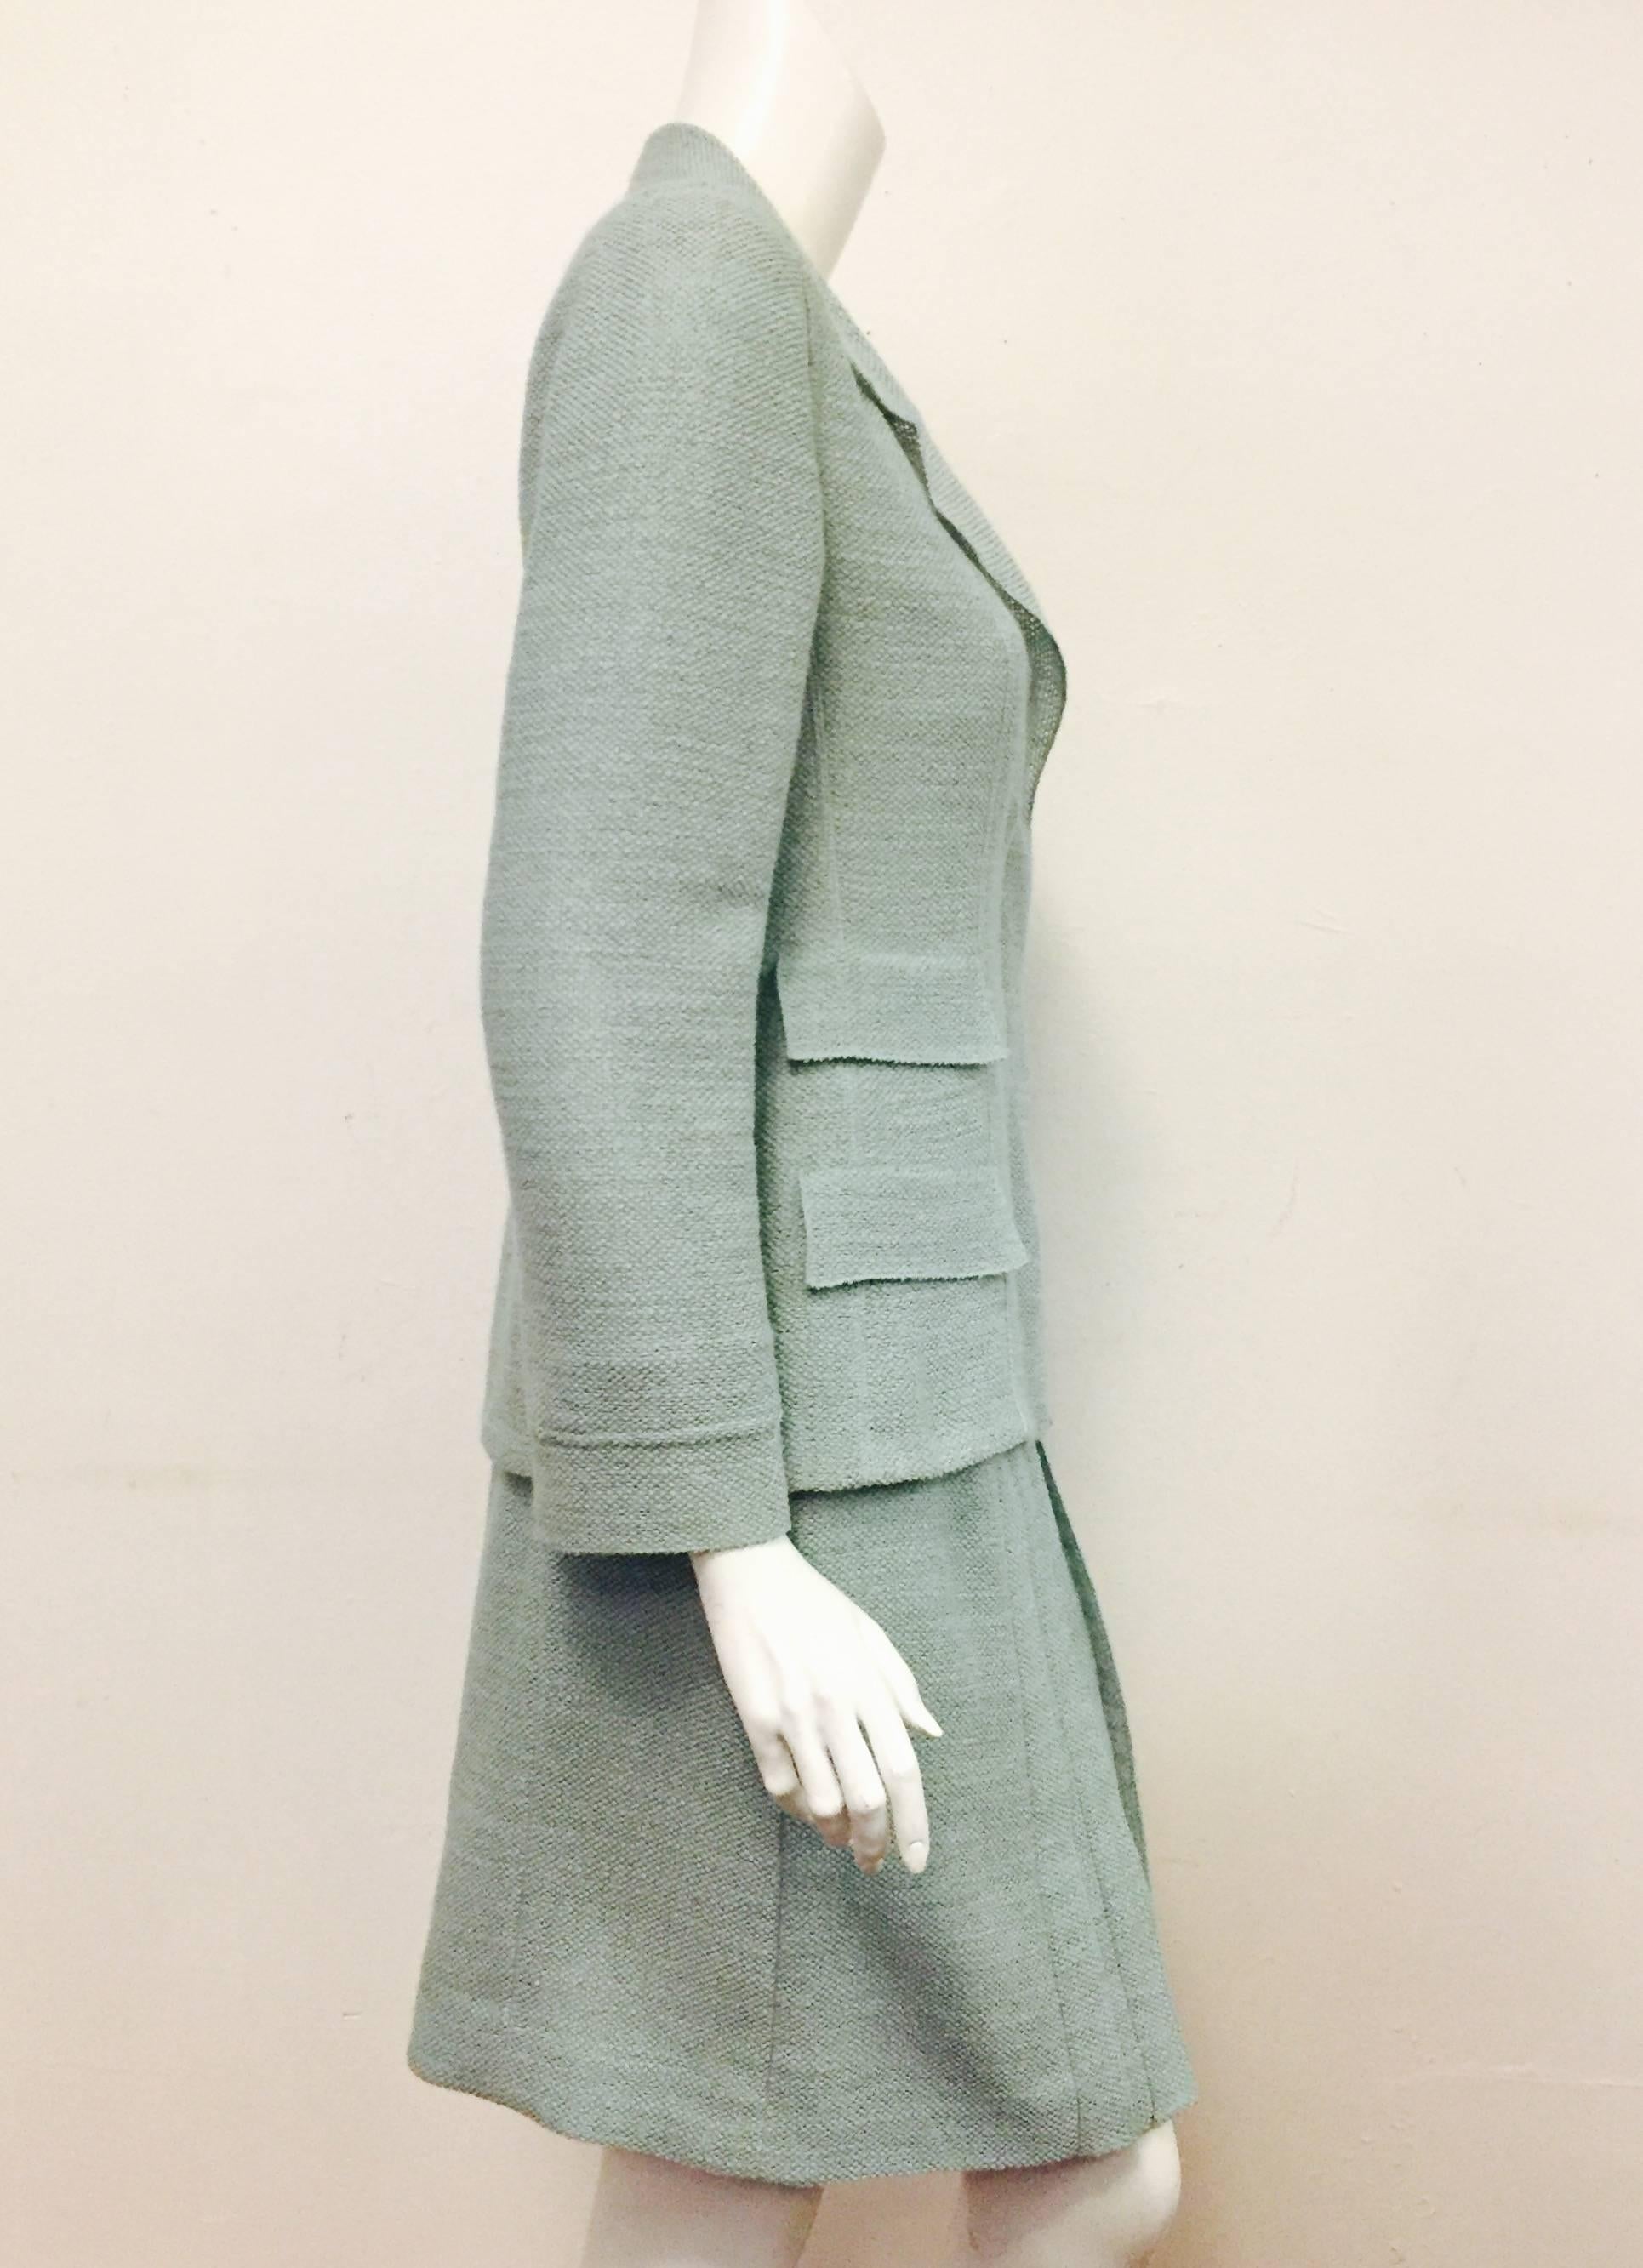 Chanel's teal wool blend lightweight tweed skirt suit with 4 flap pockets, notched collar and 3 hidden CC buttons goes from season to season.   Skirt has faux pleated details at front and hidden zipper at back.   Both the jacket and skirt are lined